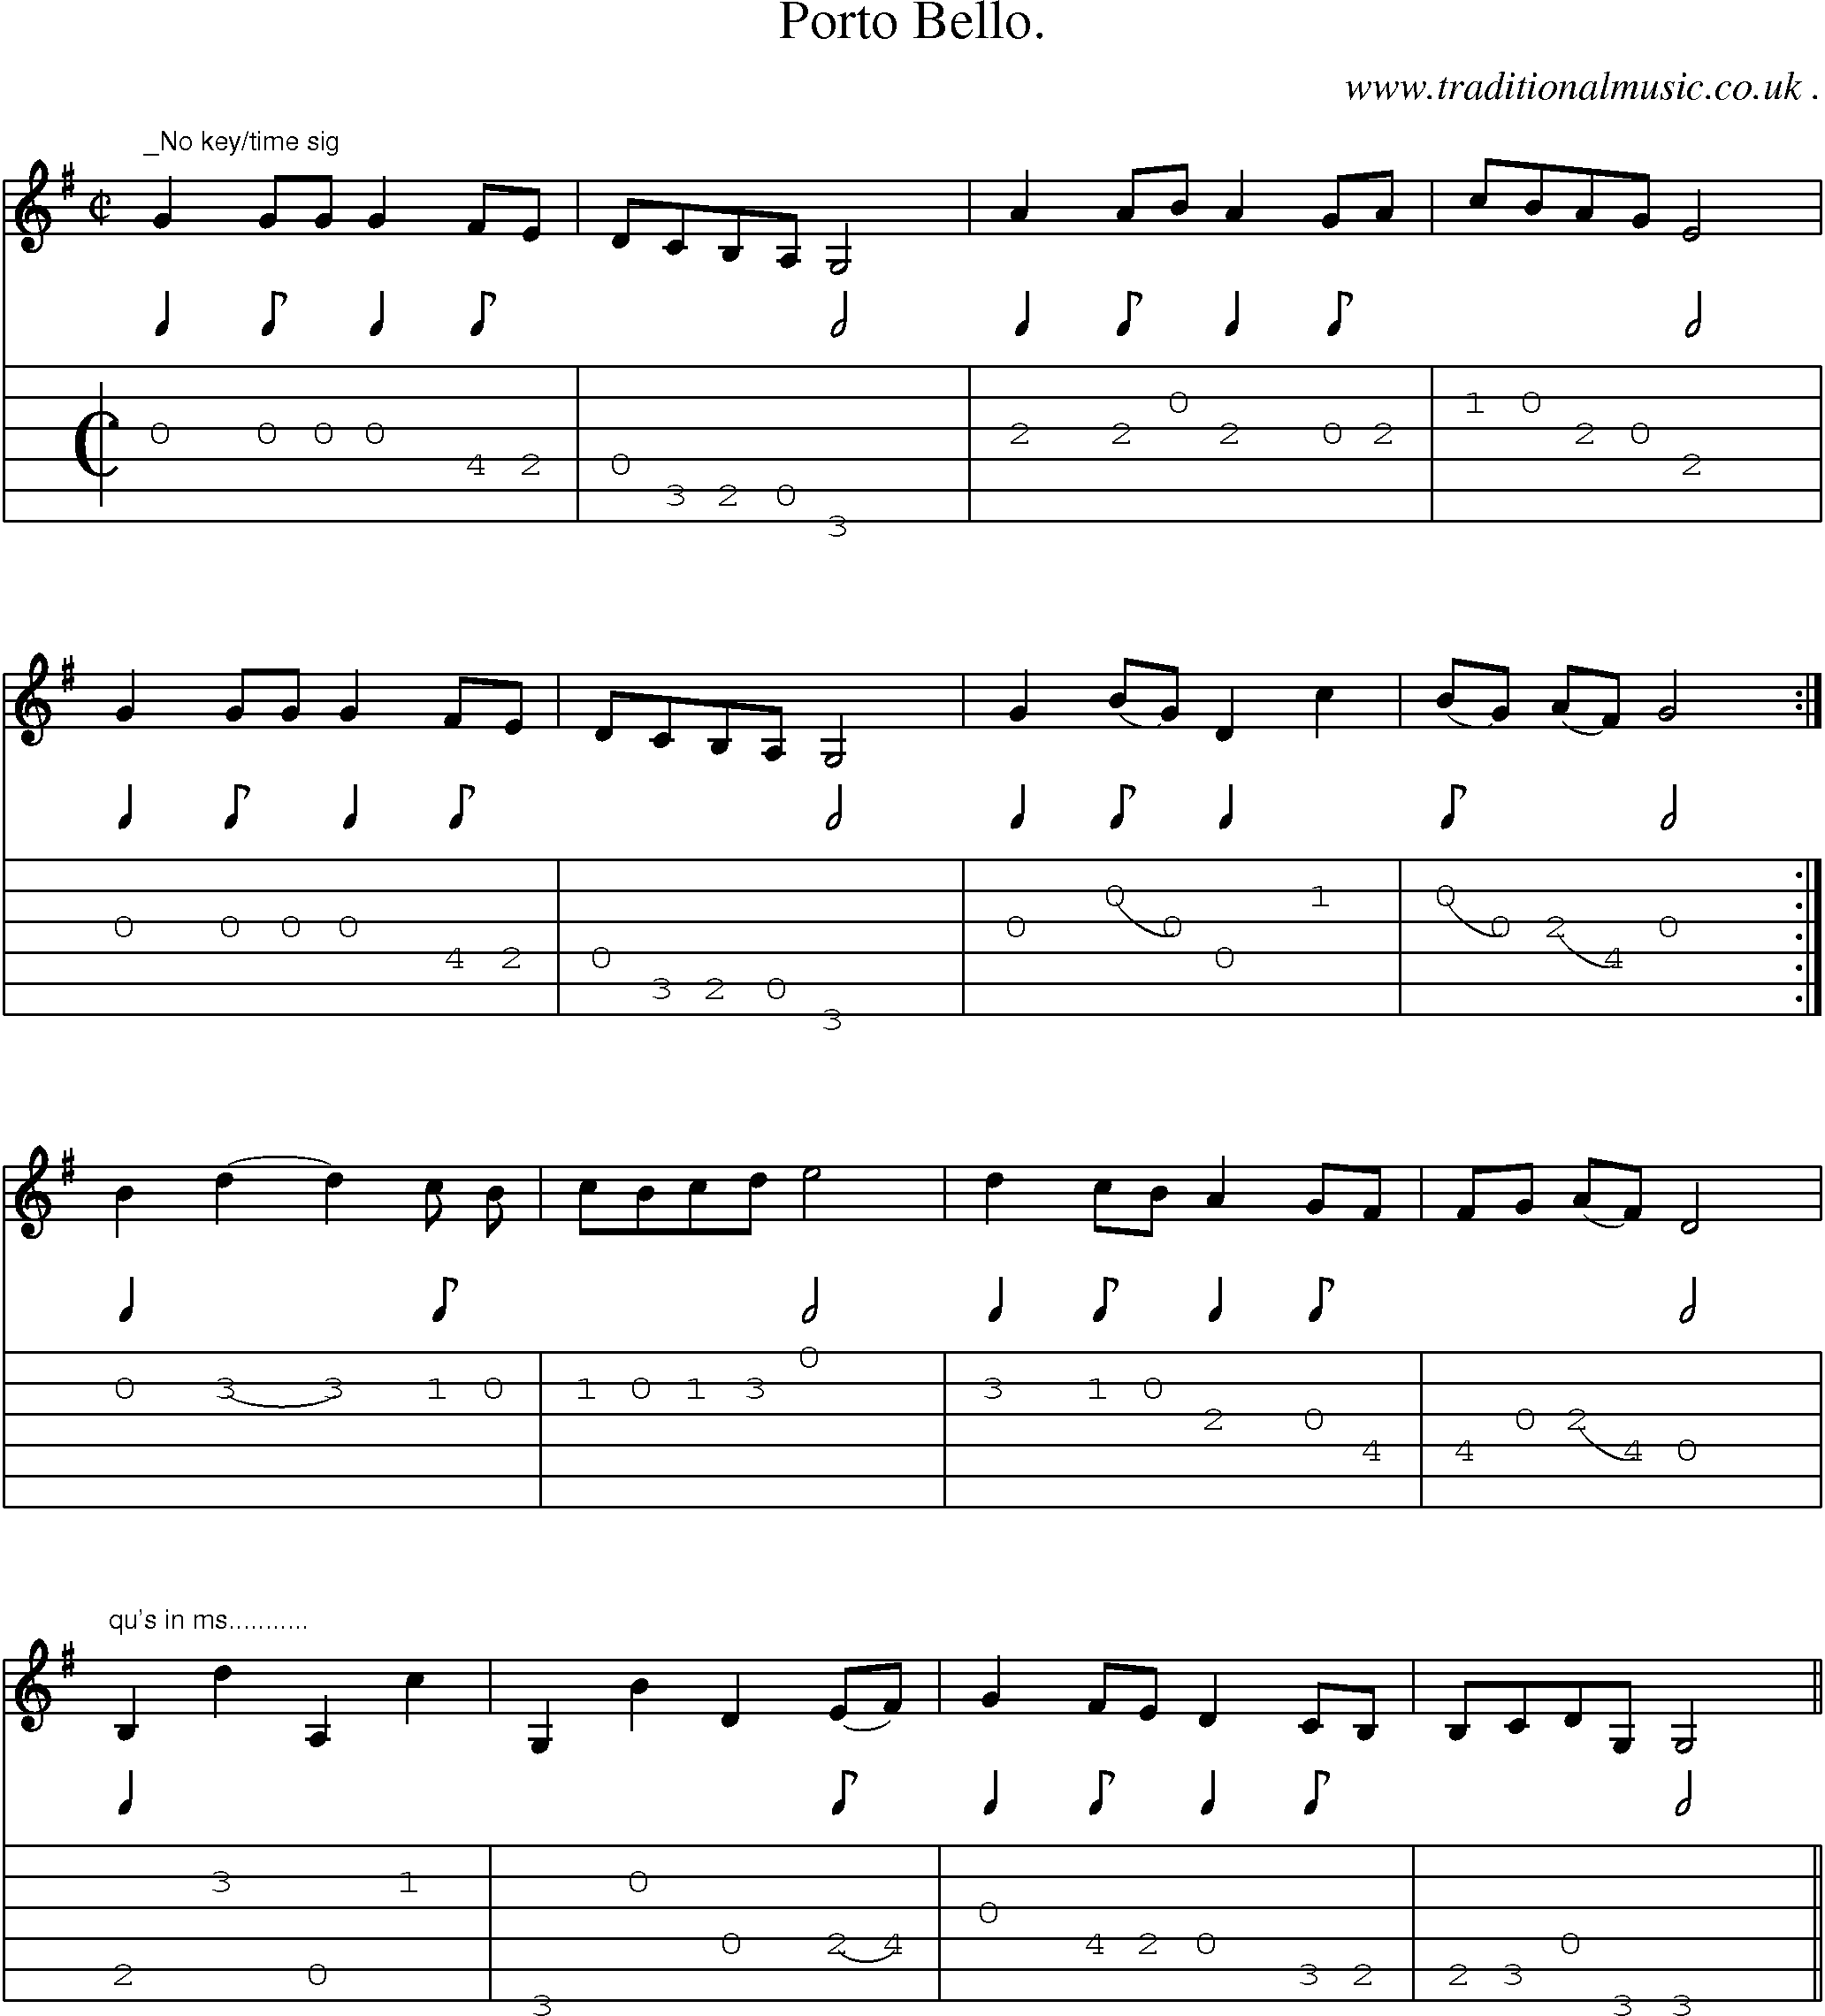 Sheet-Music and Guitar Tabs for Porto Bello